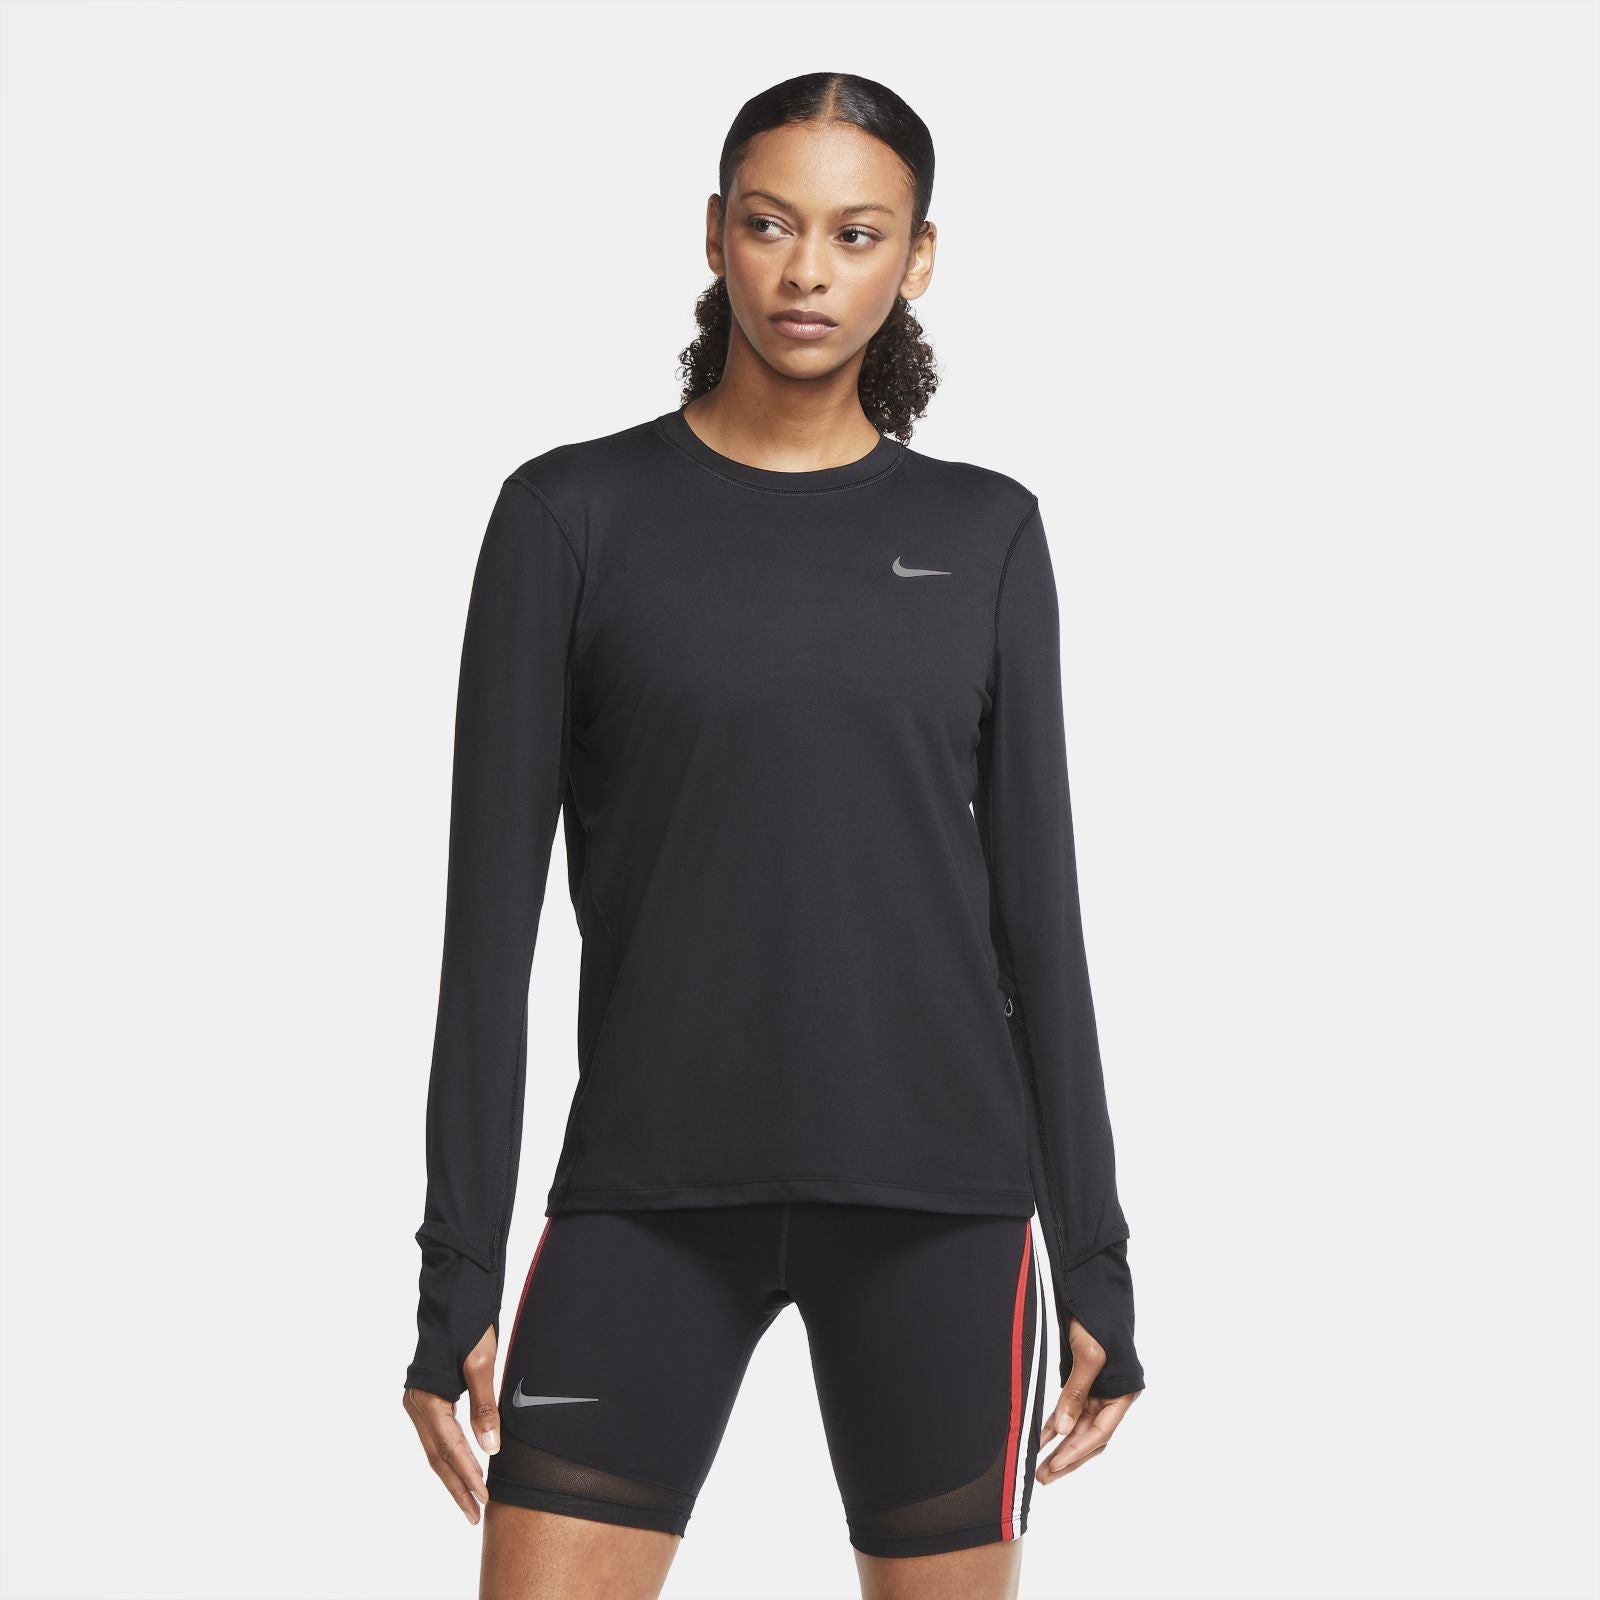 Dri-FIT Element Crew Long Sleeve Nike Apparel | Playmakers